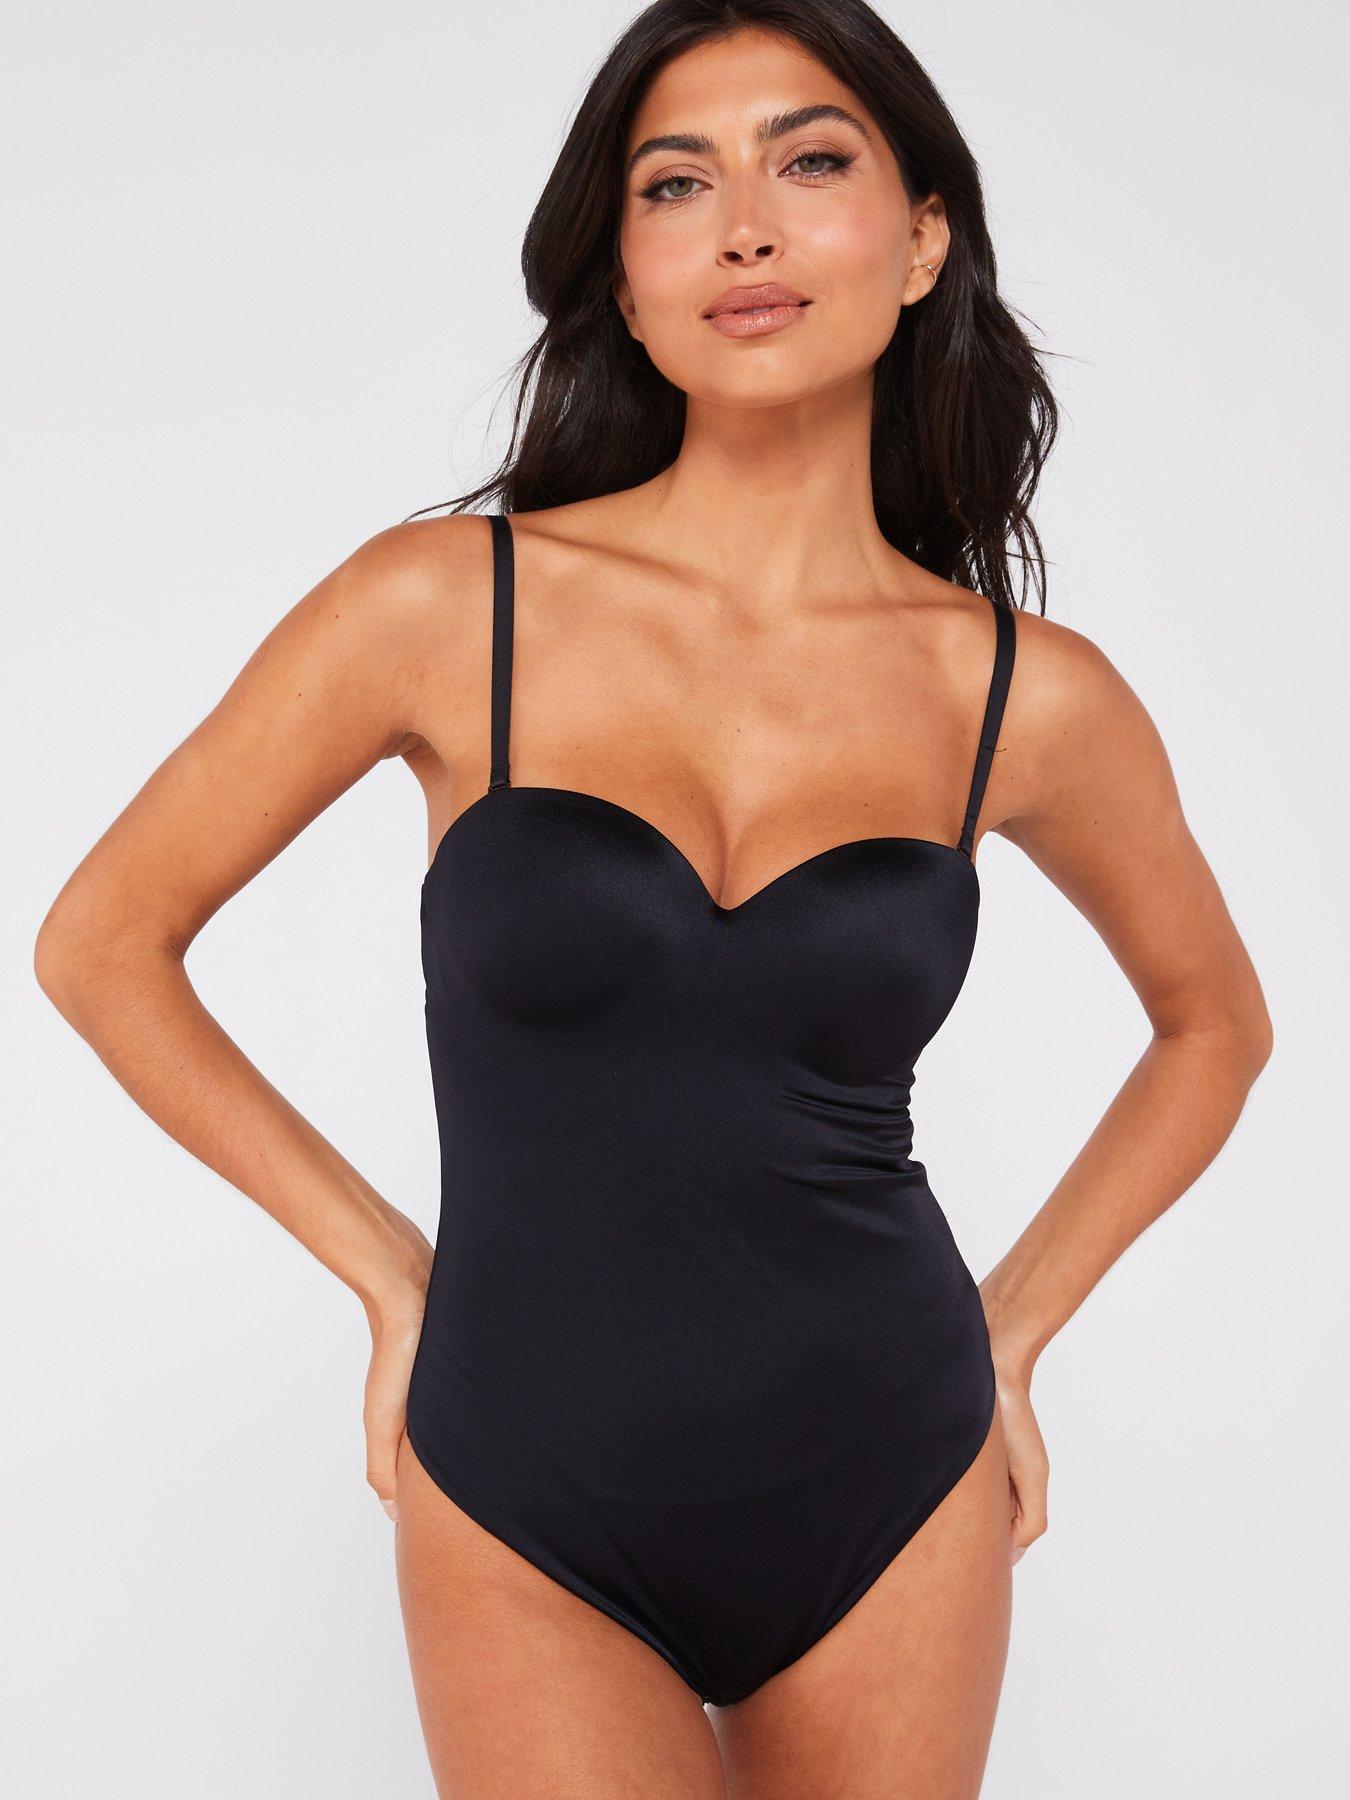  NOTHING FITS BUT Women's The Bump Support Contour Bodysuit (S,  Black) : Clothing, Shoes & Jewelry